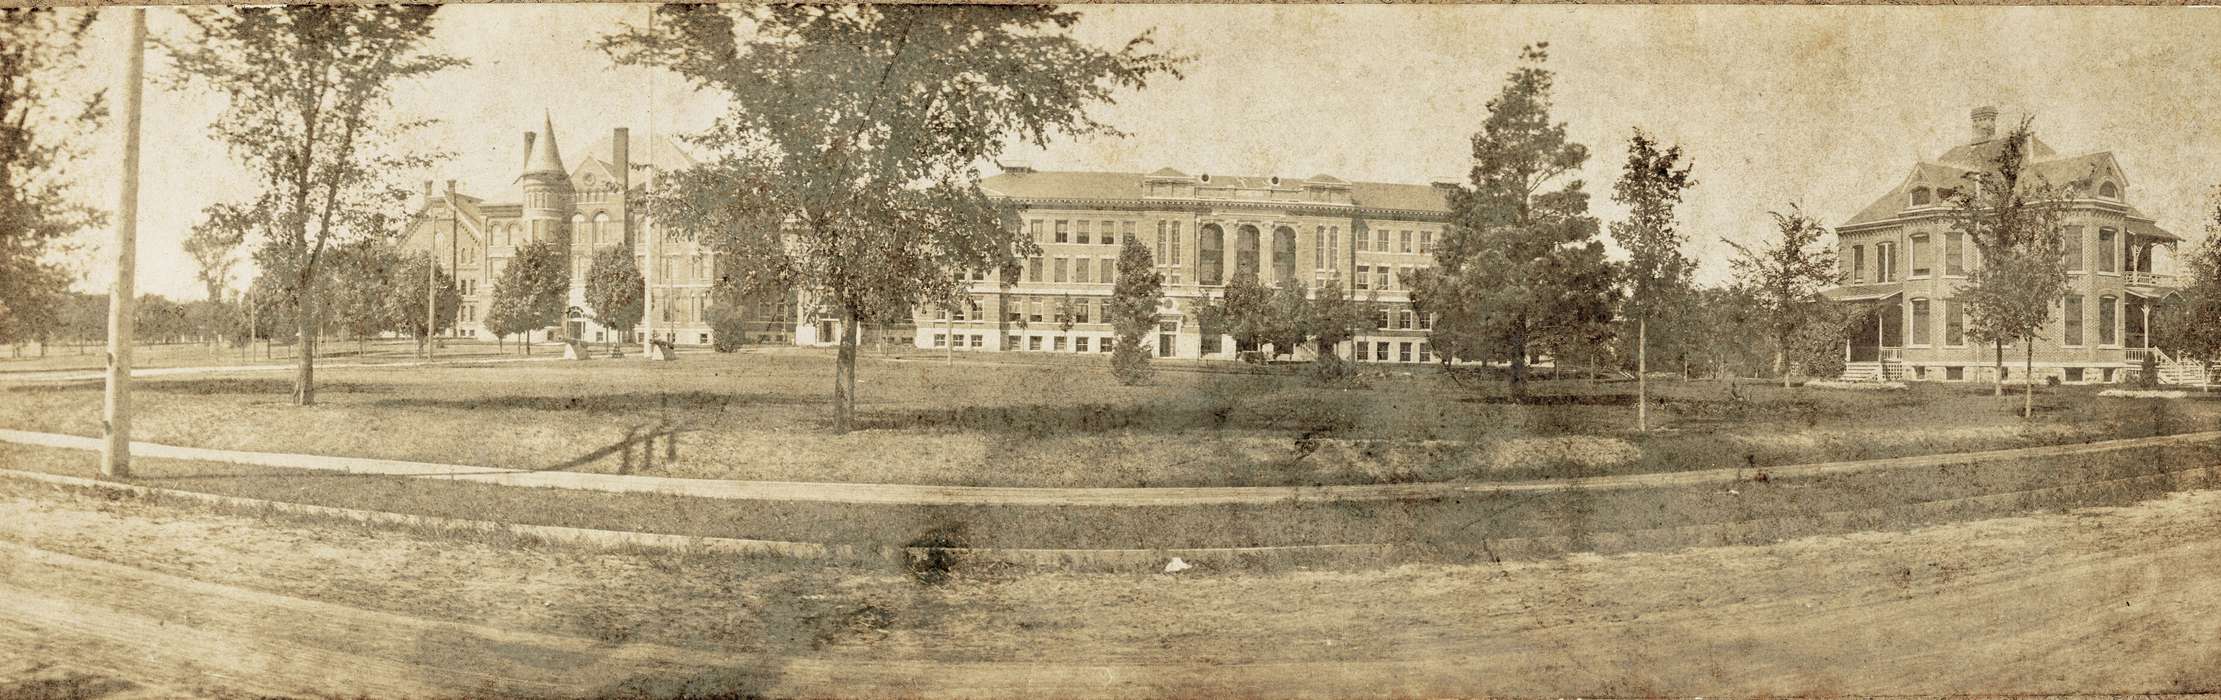 iowa state normal school, Cedar Falls, IA, history of Iowa, Schools and Education, old admin, university of northern iowa, old gilchrist, uni, Iowa History, lang hall, Iowa, UNI Special Collections & University Archives